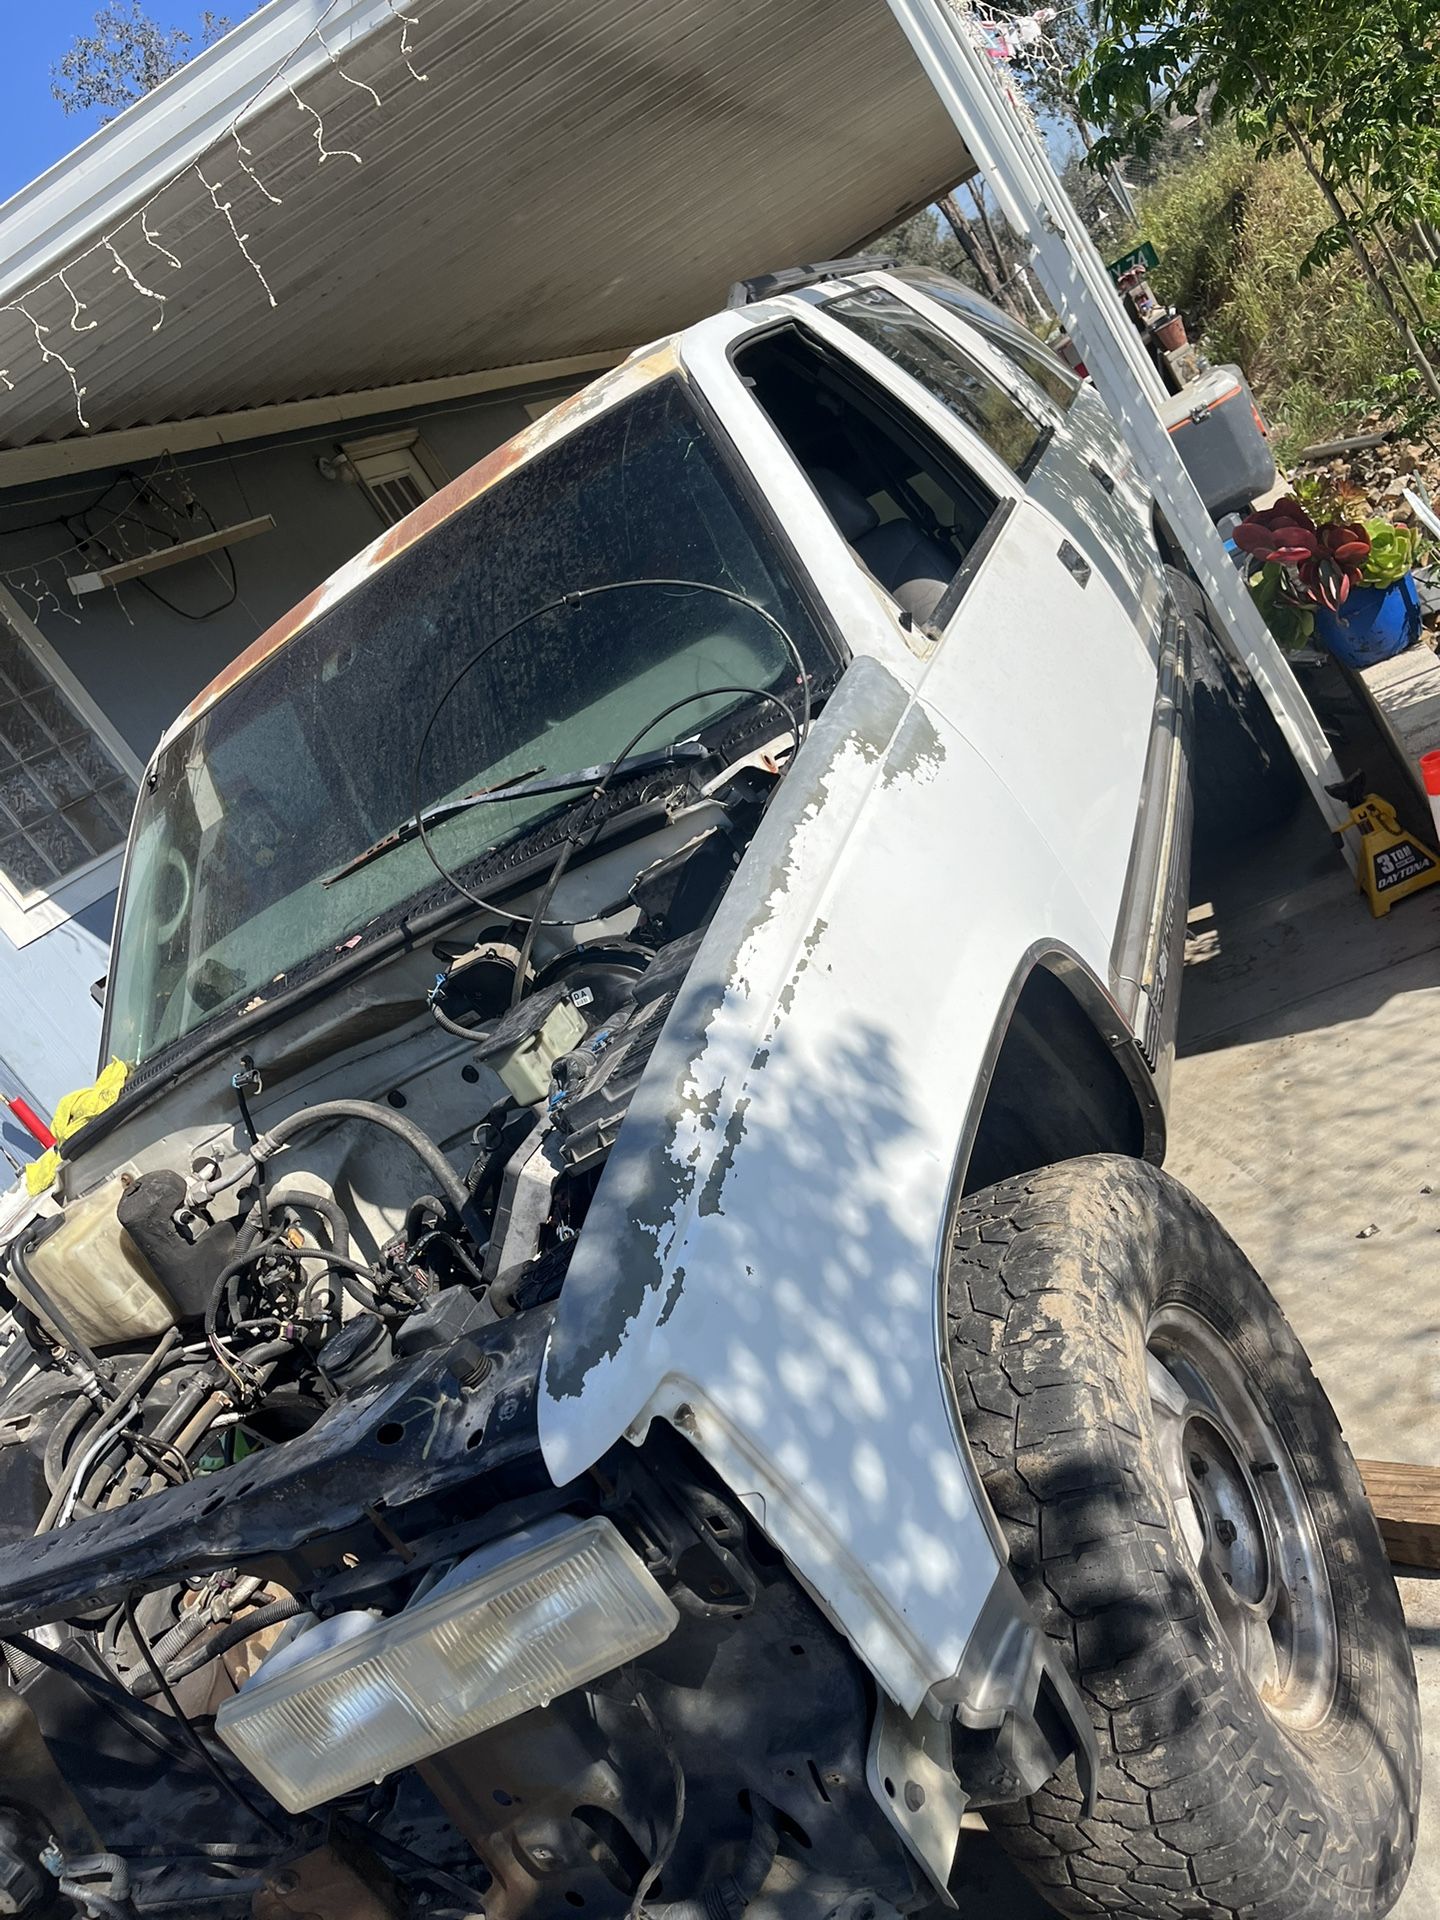 1998 Chevy Tahoe 4x4 Part out 